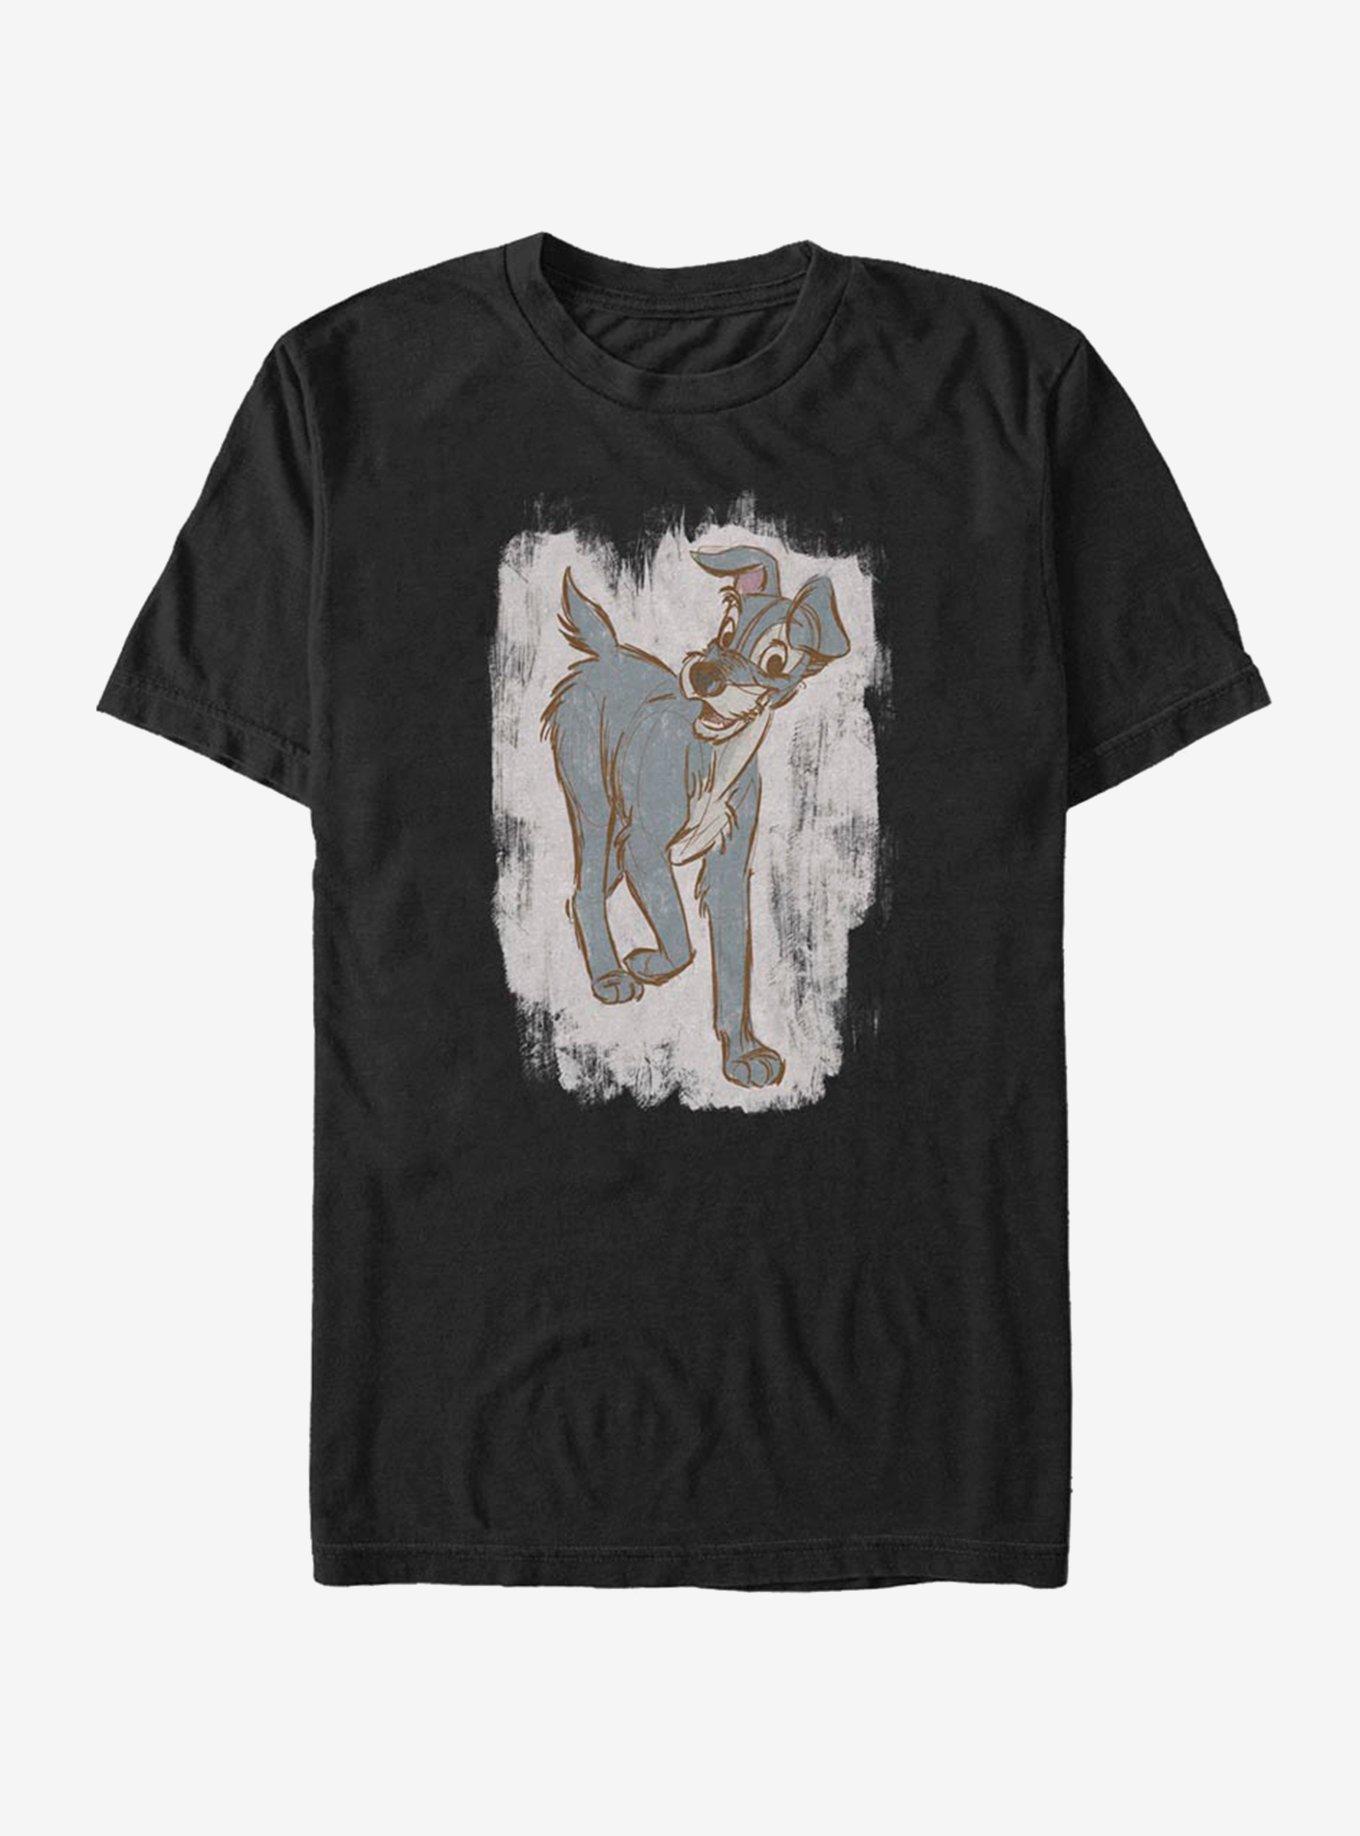 Disney Lady And The Tramp Pose T-Shirt